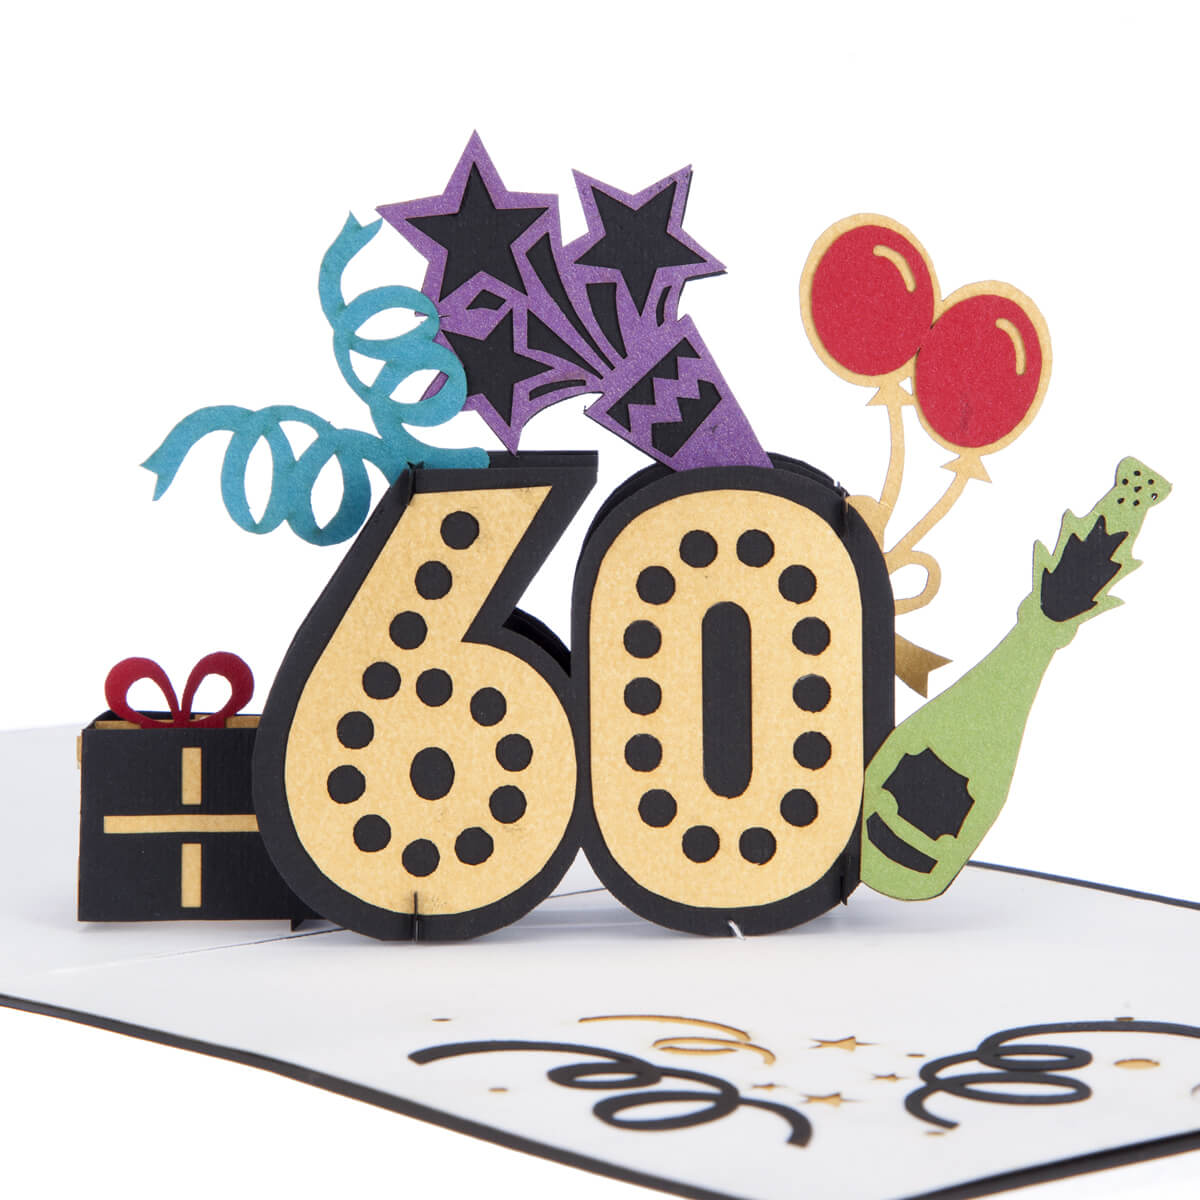 Close up image of colourful 60th birthday pop up card